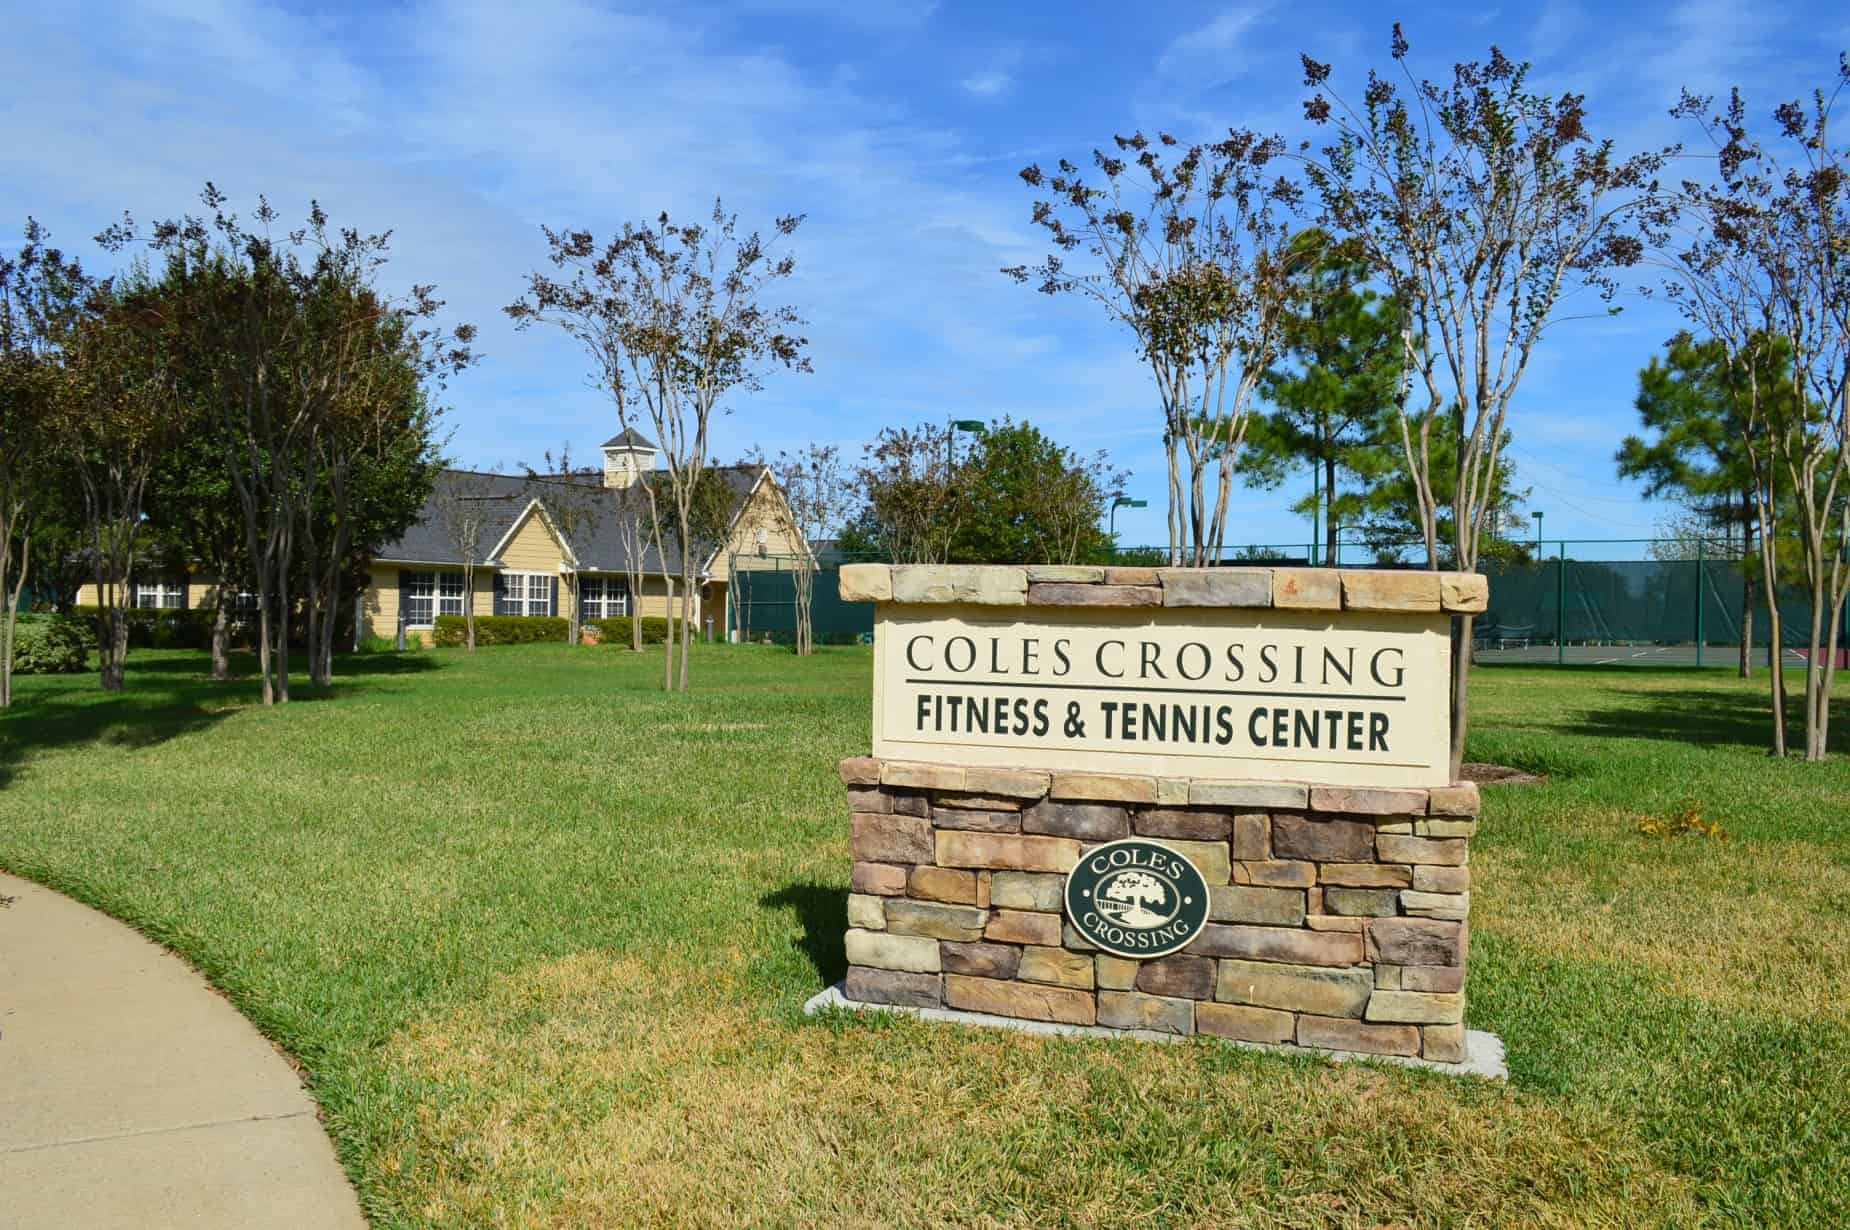 Coles Crossing Cypress TX Fitness & Tennis Center